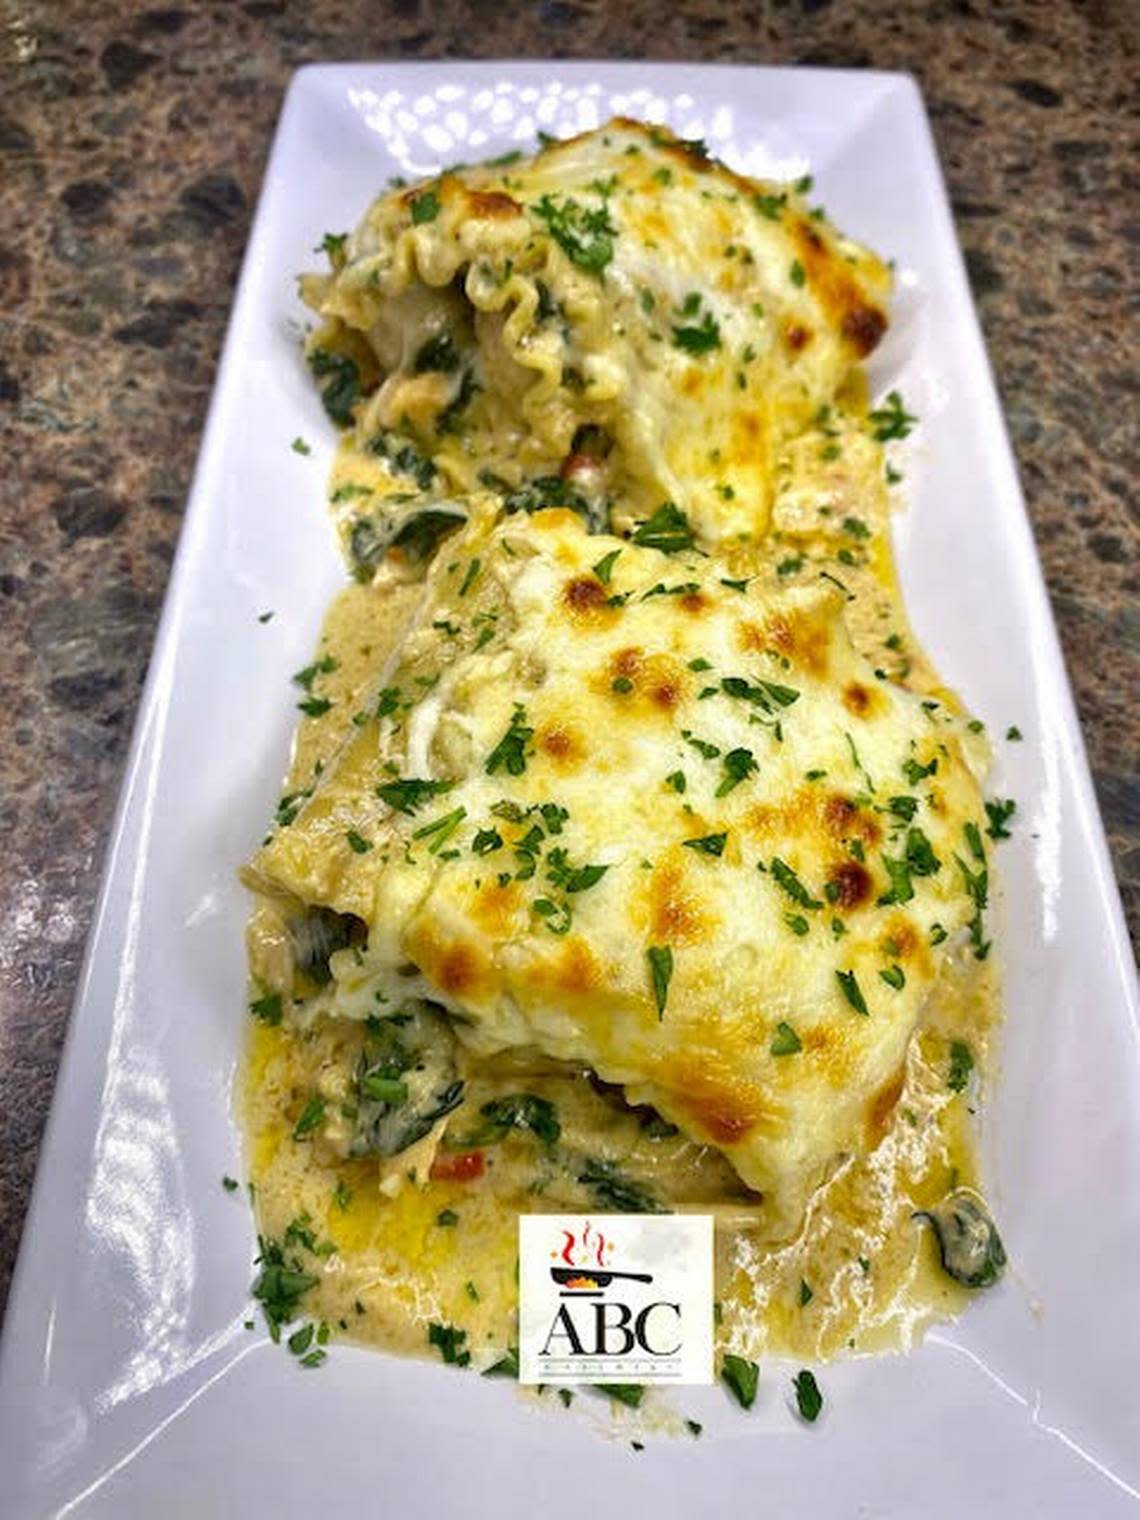 Tuscan chicken lasagna with a homemade Alfredo sauce from ABC Catering LLC food truck.